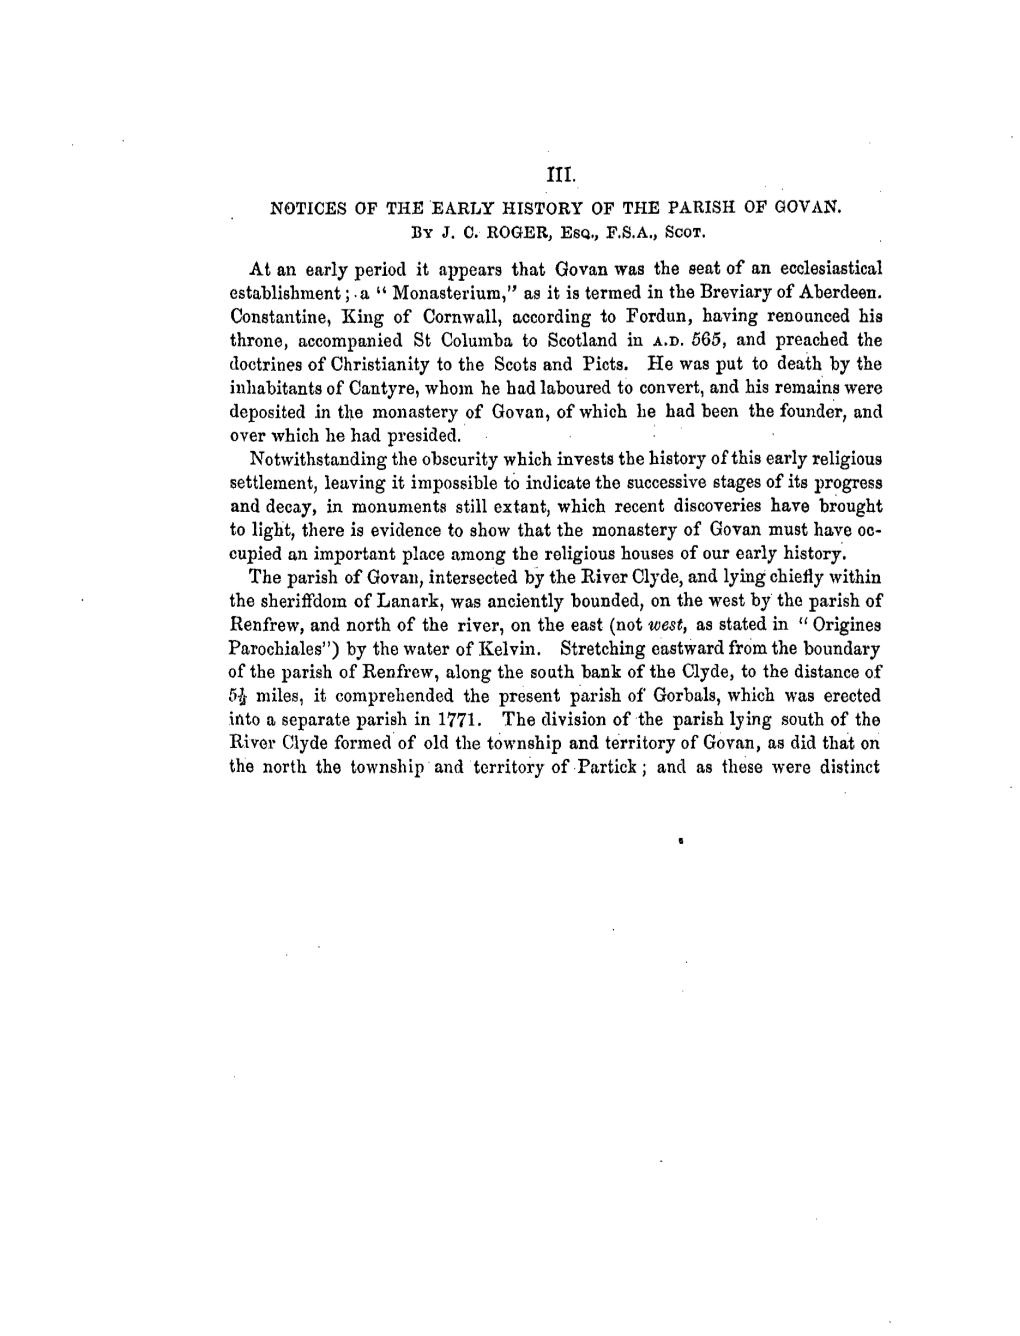 Notices of the Early History of the Parish of Govan. by J